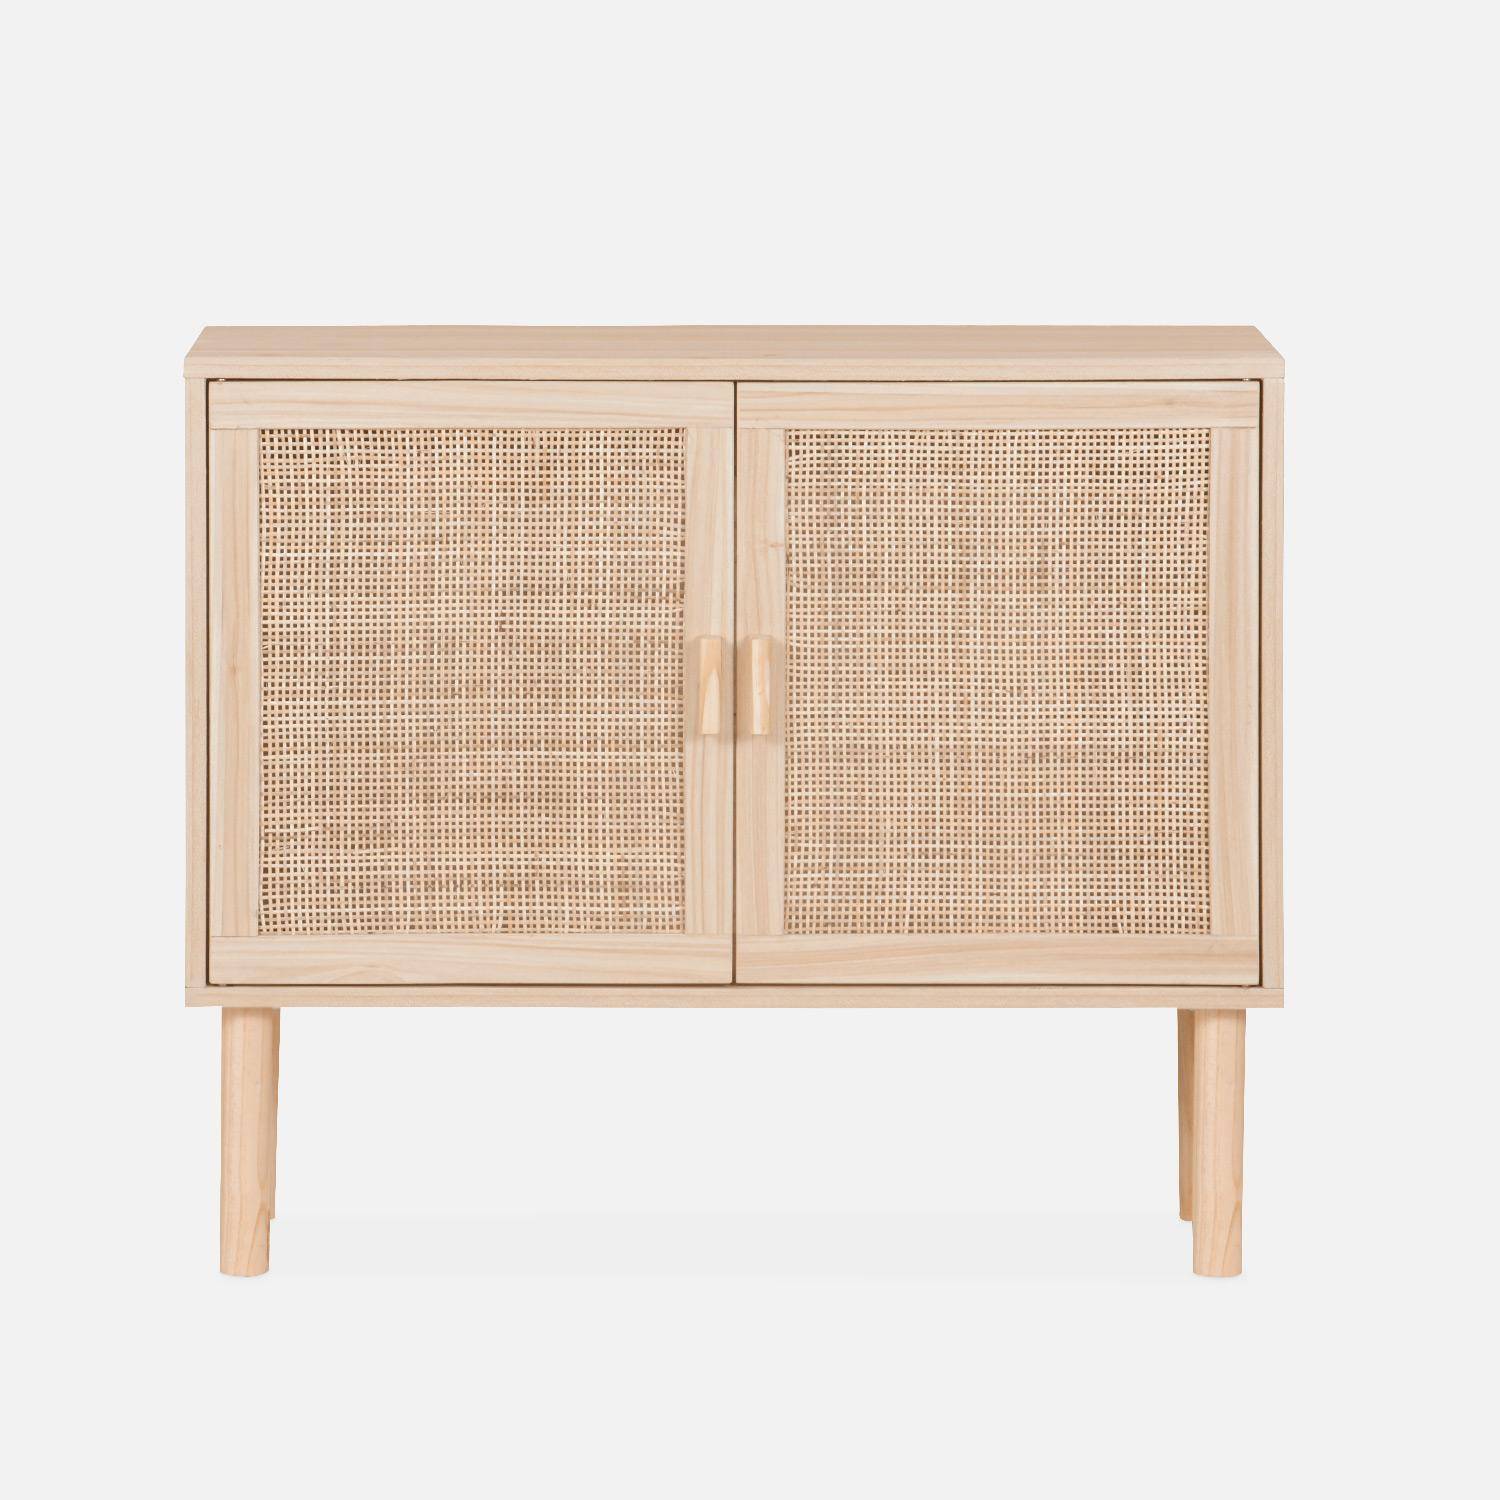 Wood and woven rattan 2-door storage cabinet with shelves, 80x30x68cm, Camargue, Natural Photo4